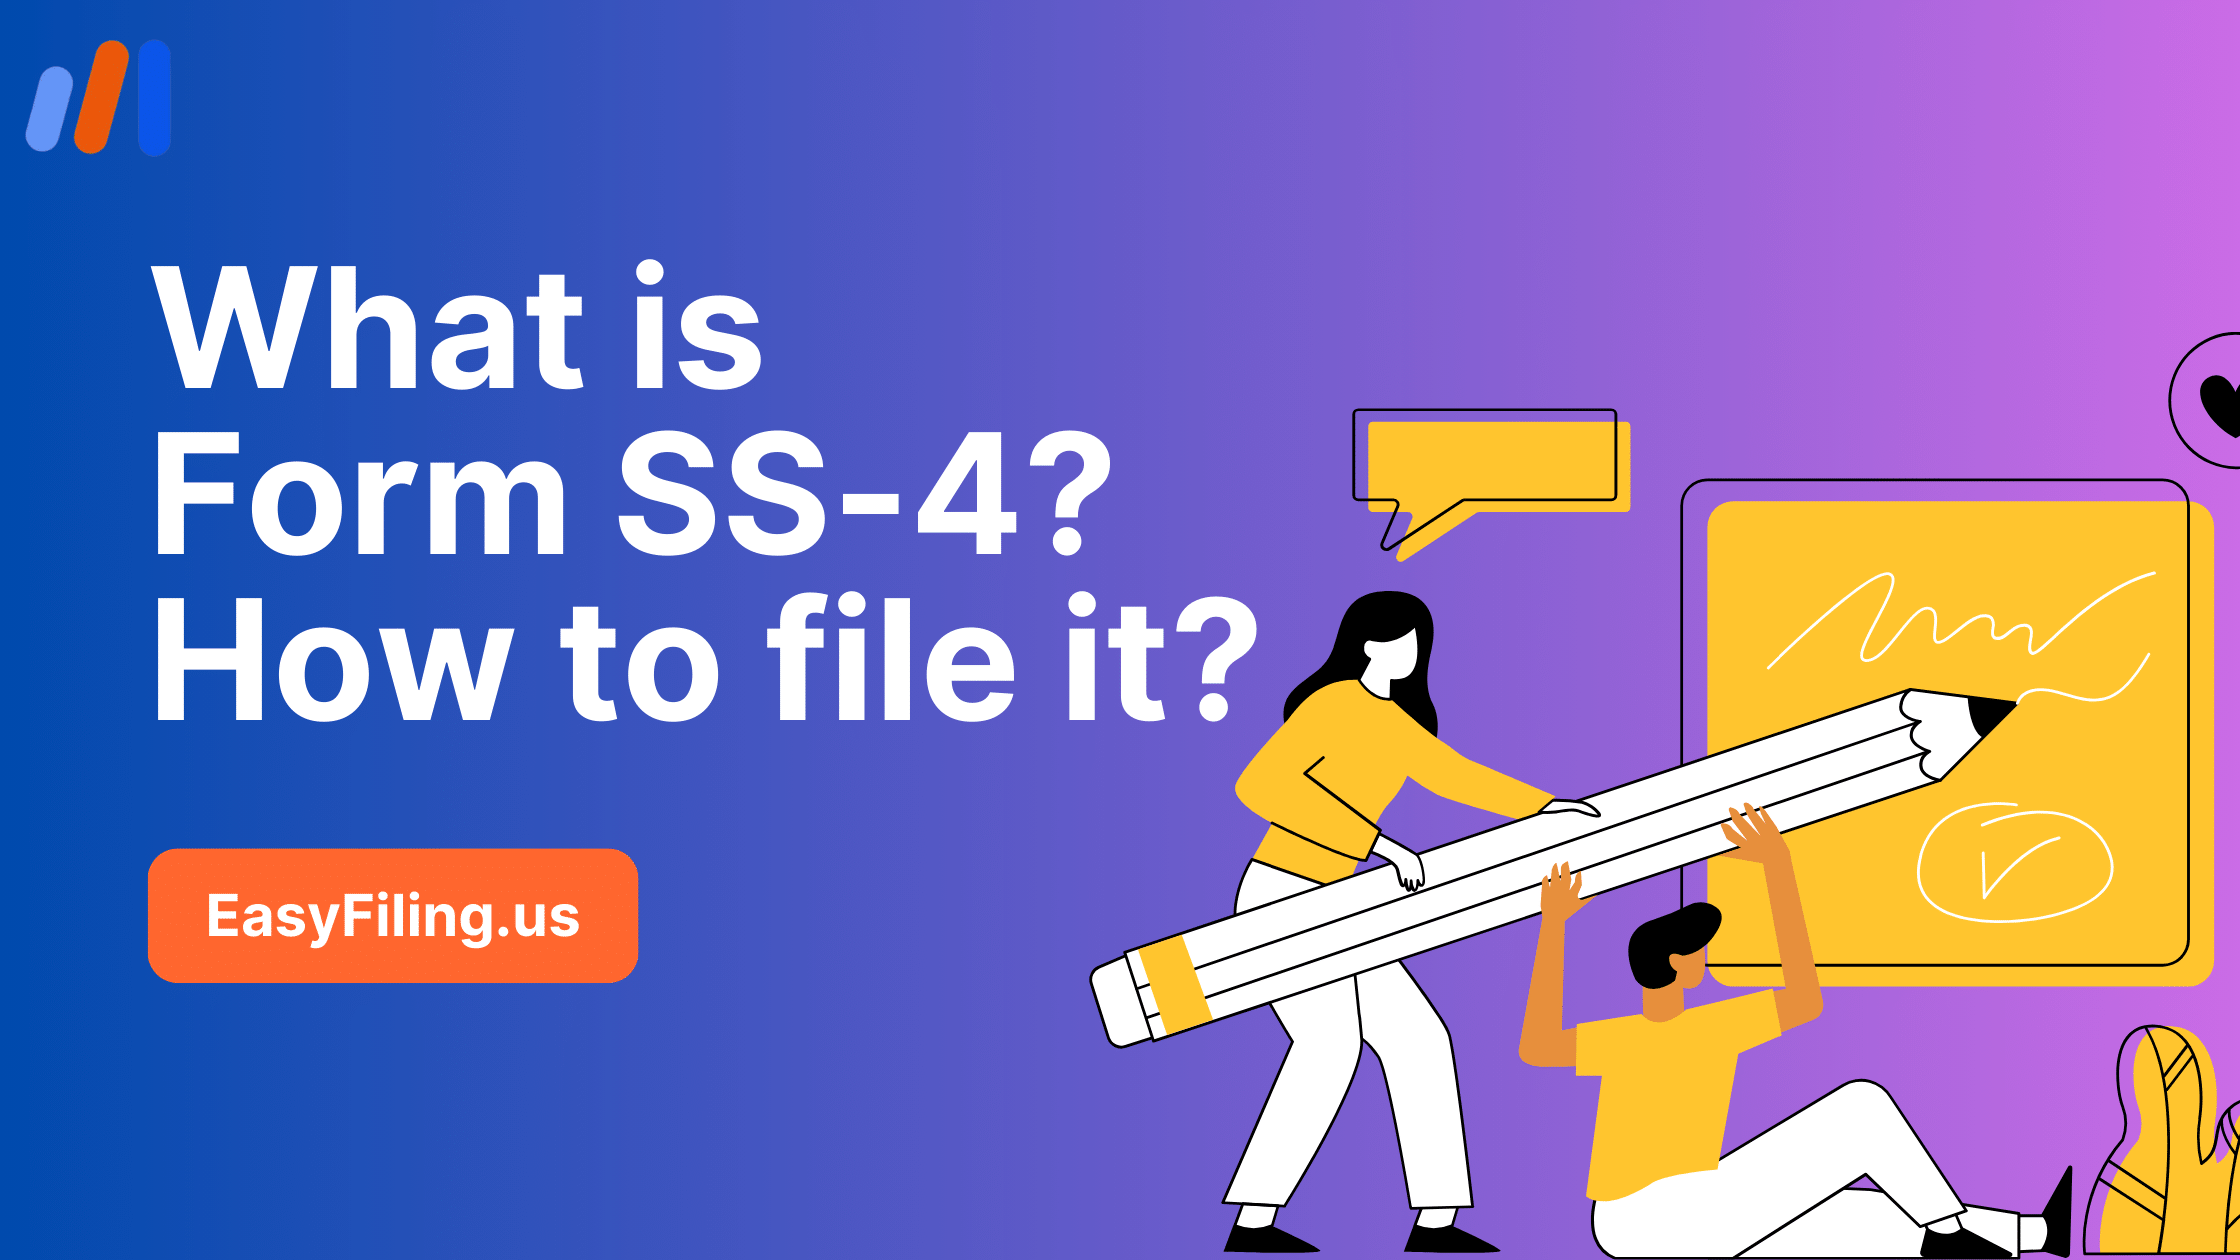 What is Form SS-4